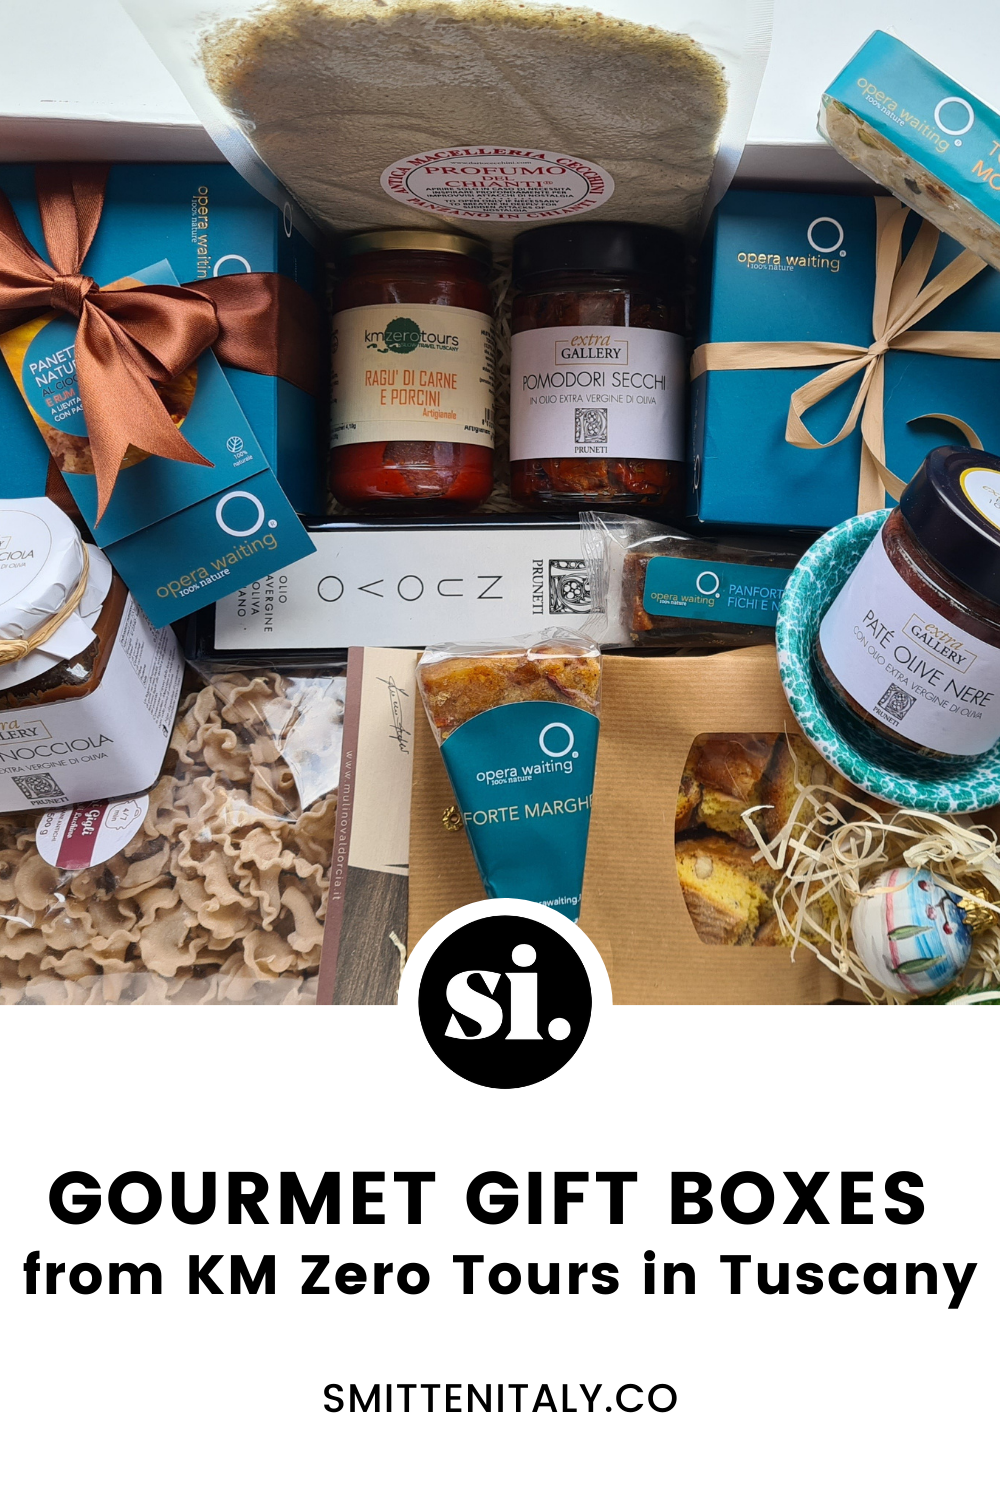 Gourmet Gift Boxes from Tuscany: KM Zero Tours 2